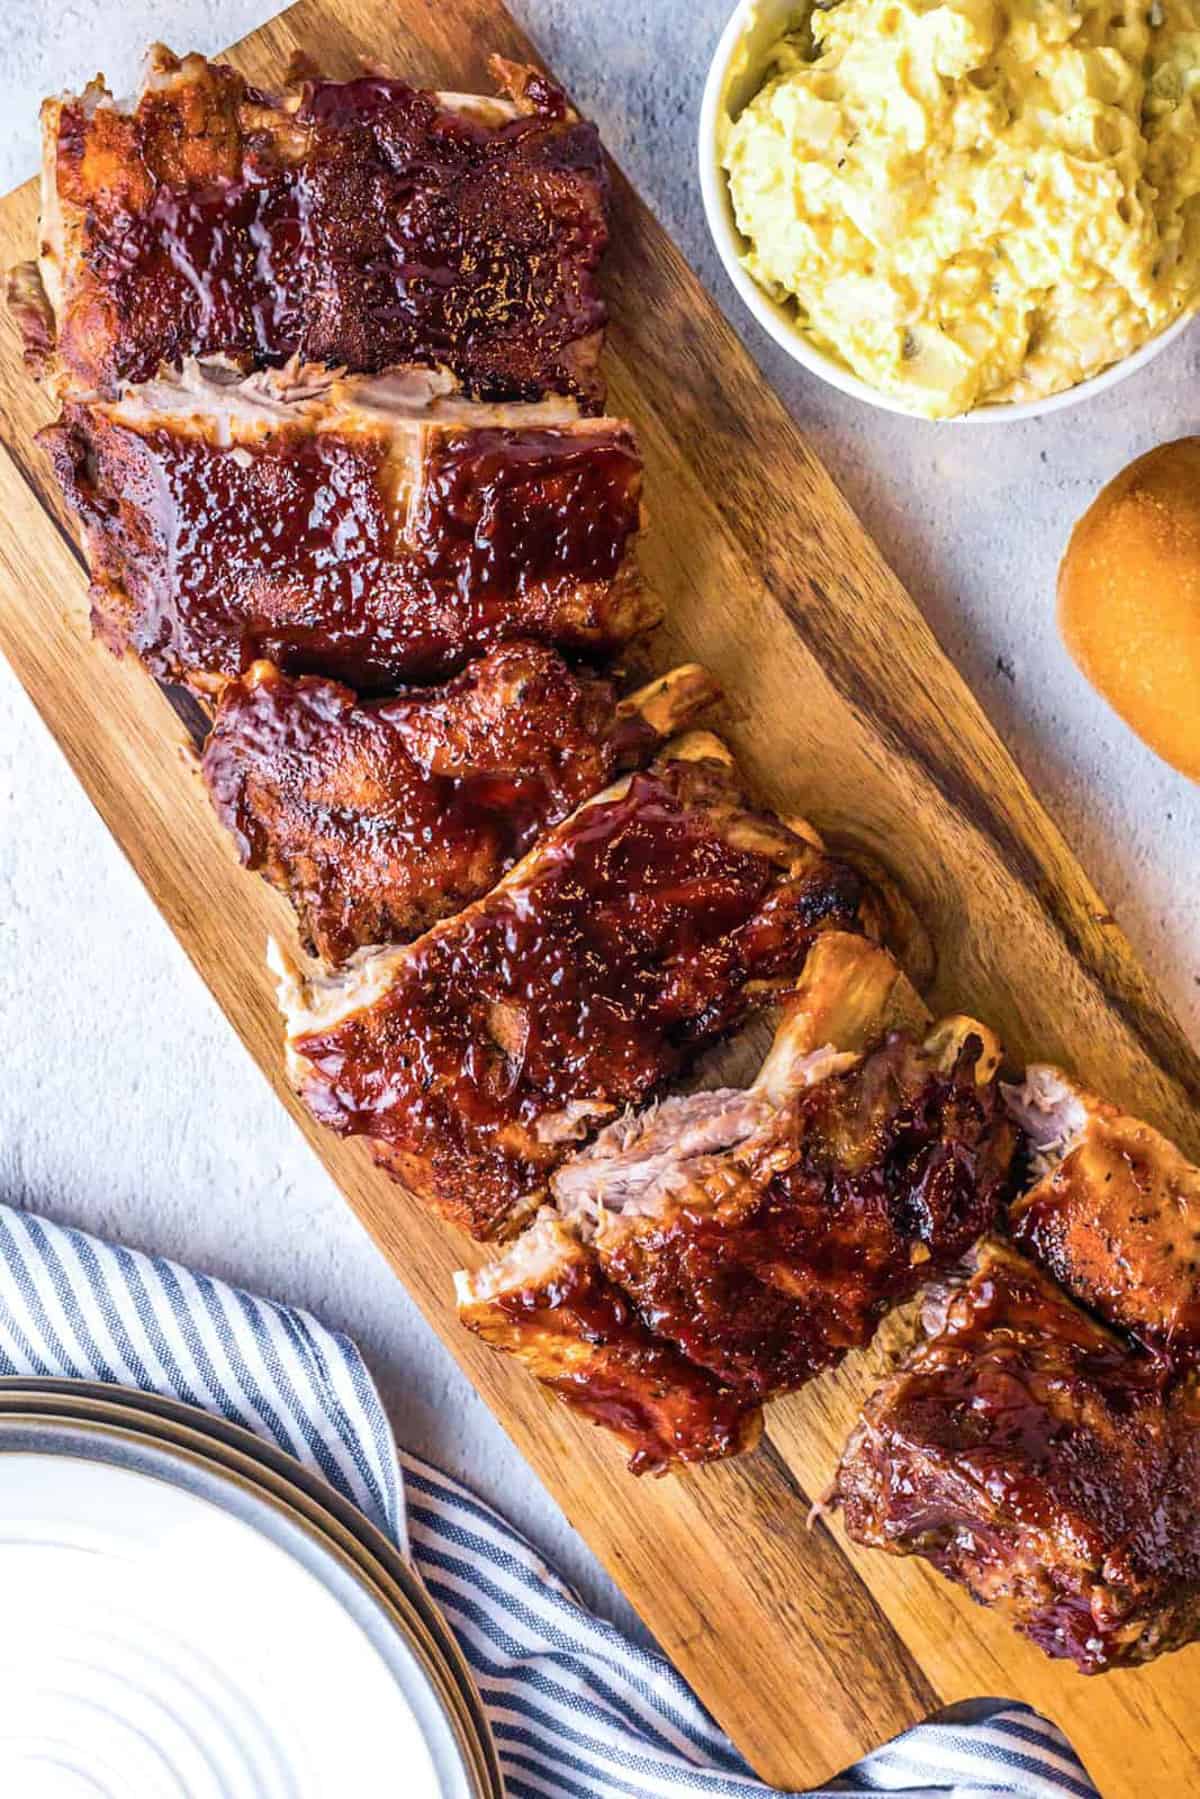 Overhead of Instant Pot BBQ Ribs on wooden board with potato salad in bowl next to them.